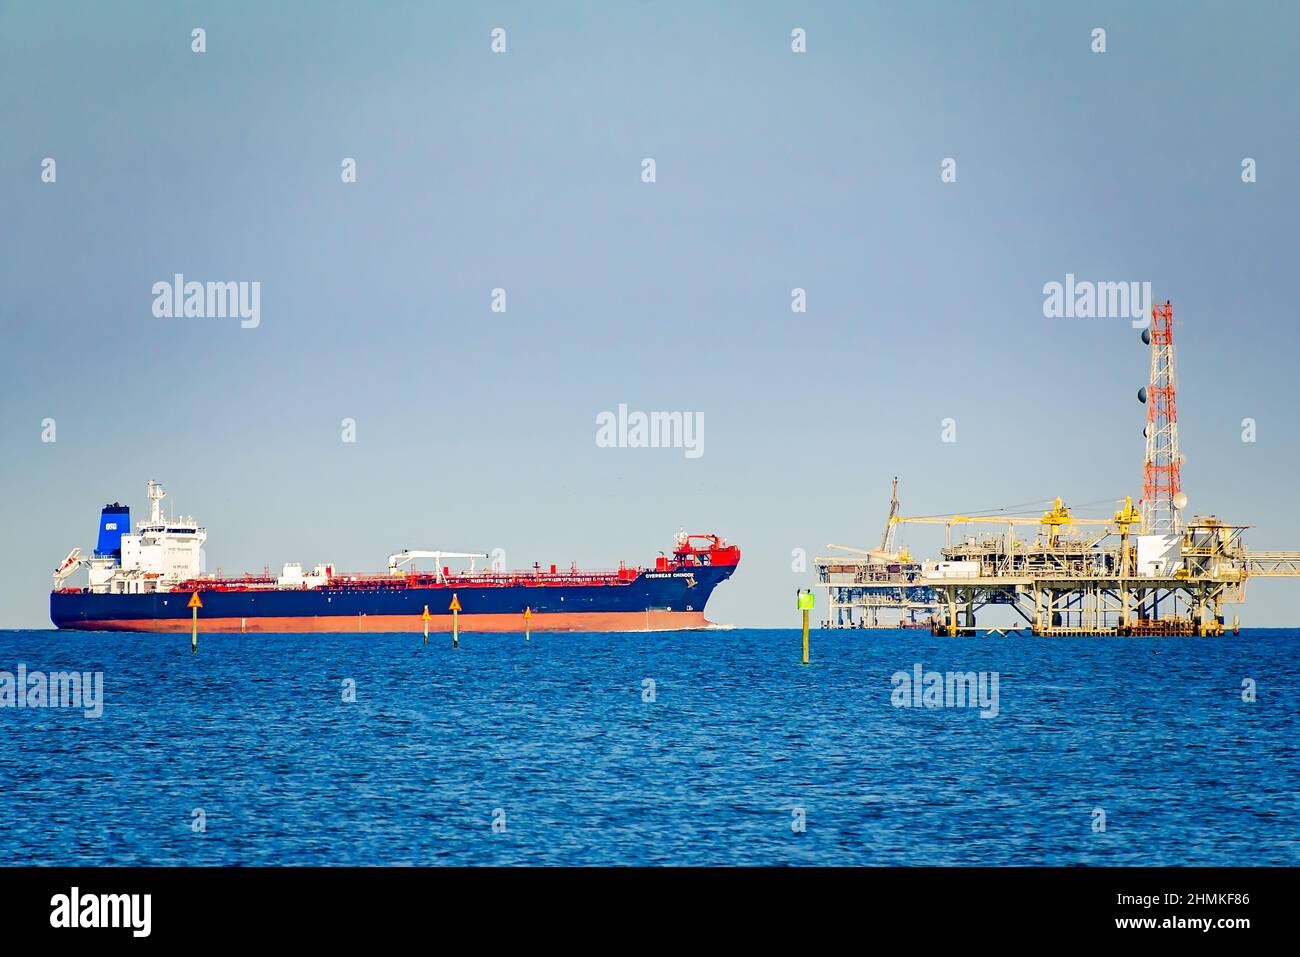 Overseas Chinook, a chemical tanker or oil tanker vessel, passes a natural gas platform, Feb. 9, 2010, in Dauphin Island, Alabama. Stock Photo